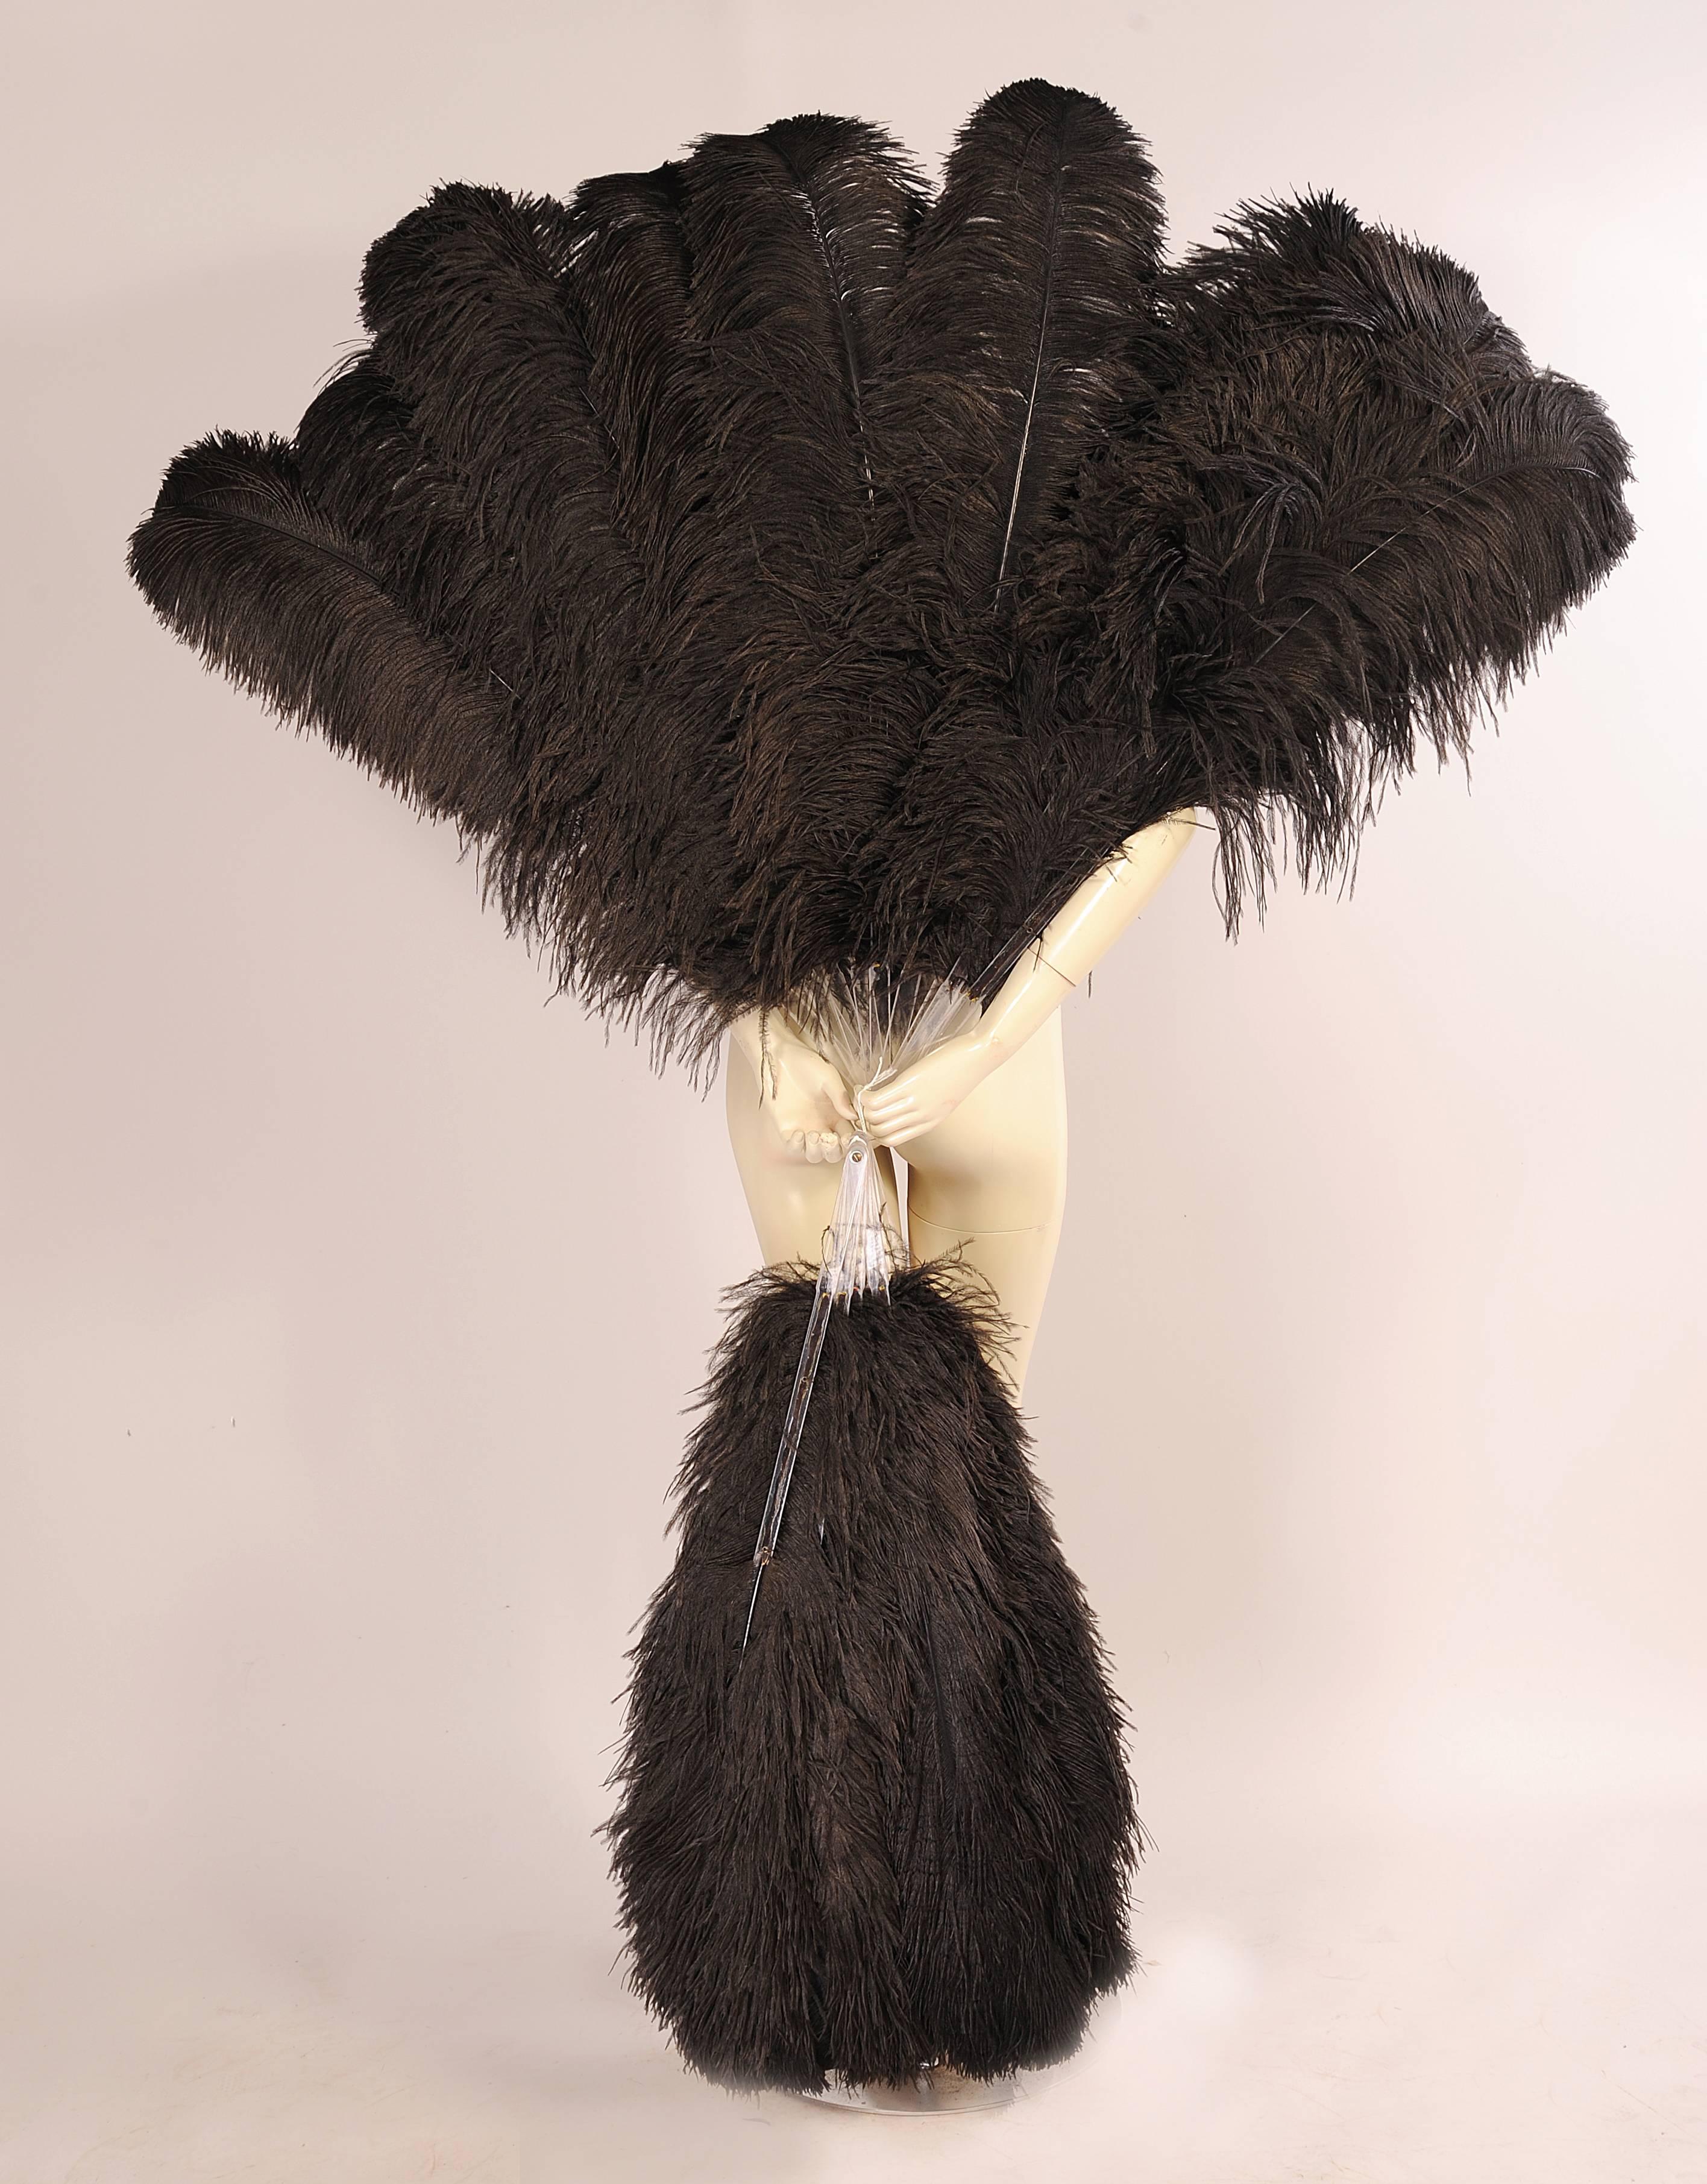 From the Paris atelier of the late Patrick Kelly these oversized Lucite and black ostrich feather fans are just so glamorous.  They were used on the runway during the Autumn Winter 1989 collection. The Lucite sticks almost disappear into the